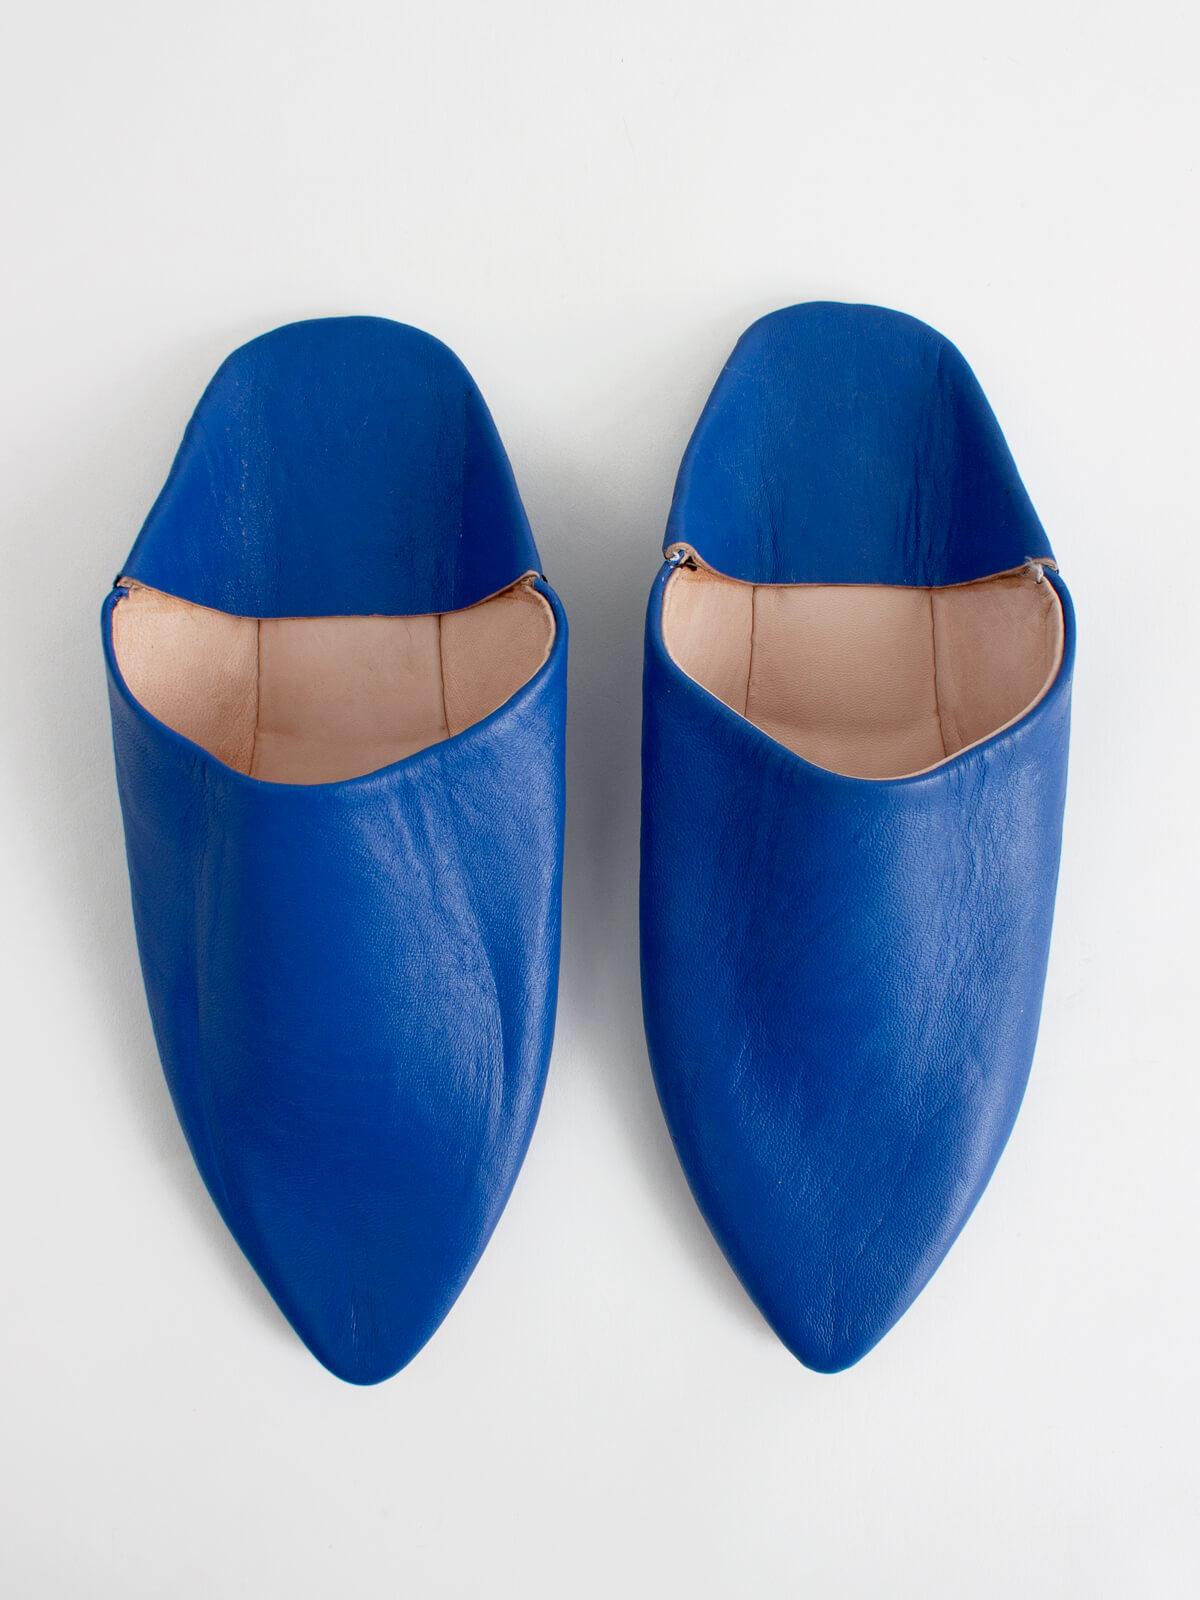 Moroccan Classic Pointed Babouche Slippers, Cobalt